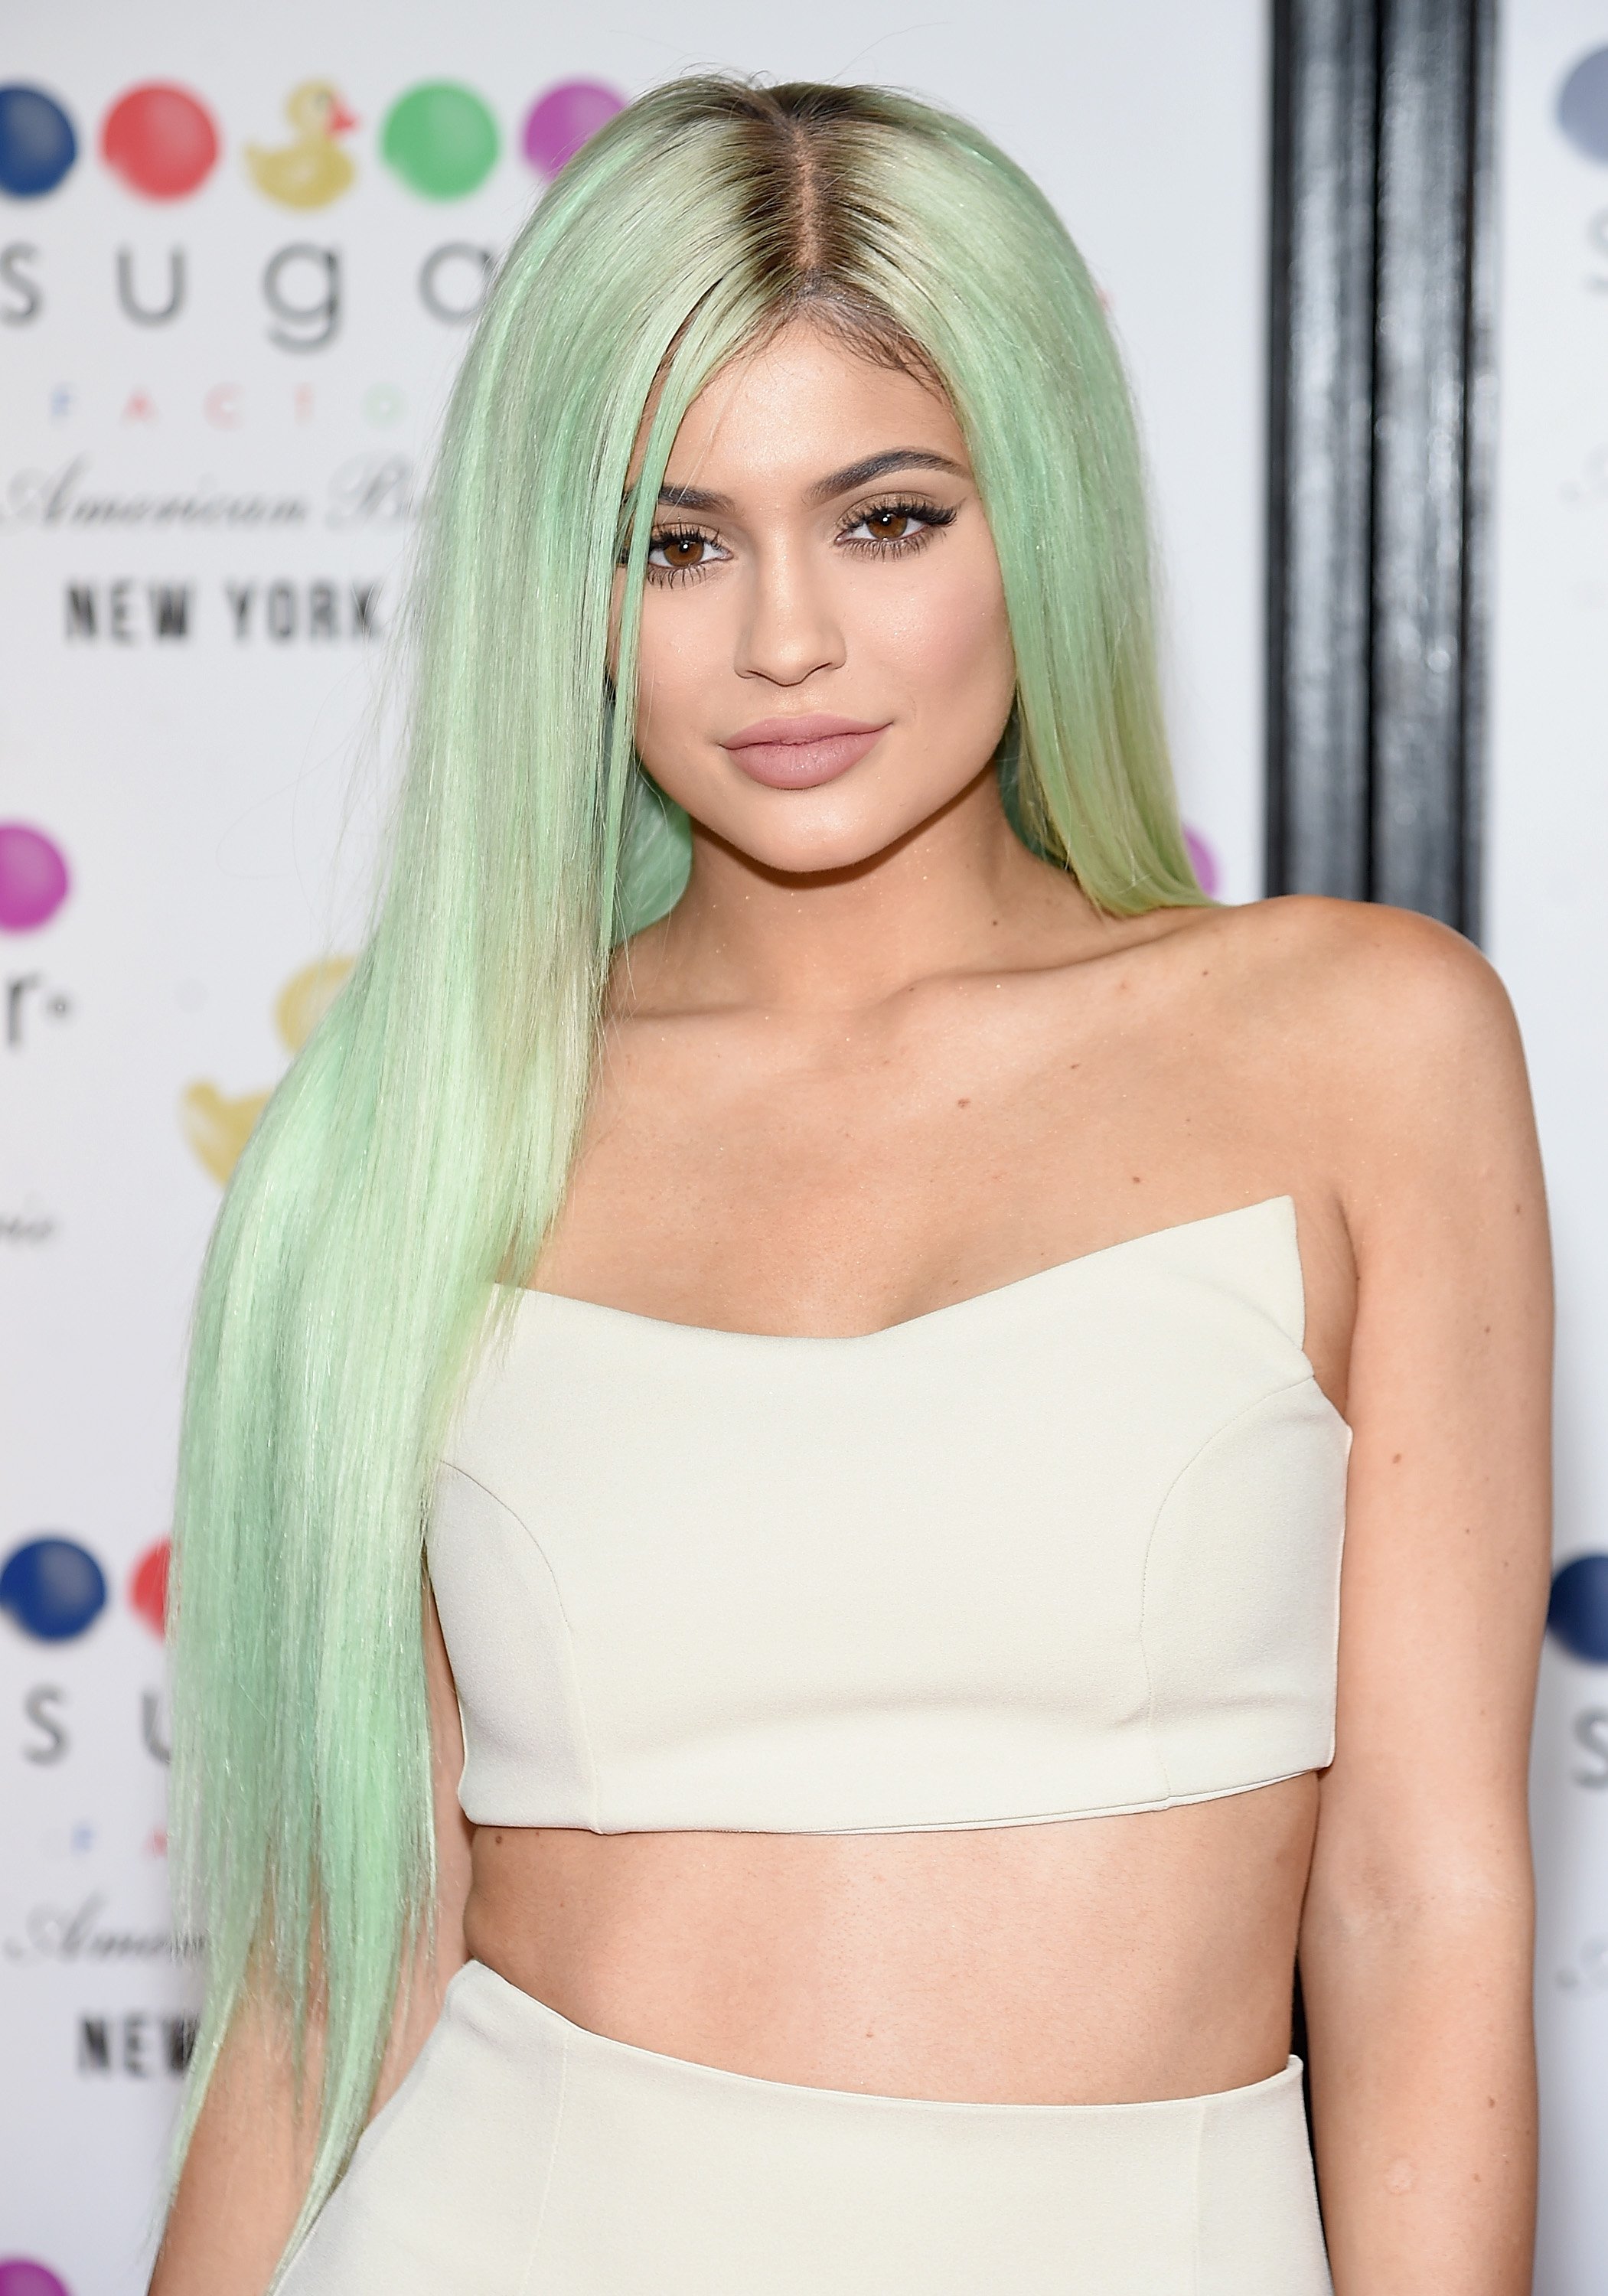 Kylie Jenner at the grand opening of the Sugar Factory American Brasserie on September 16, 2015. | Source: Getty Images